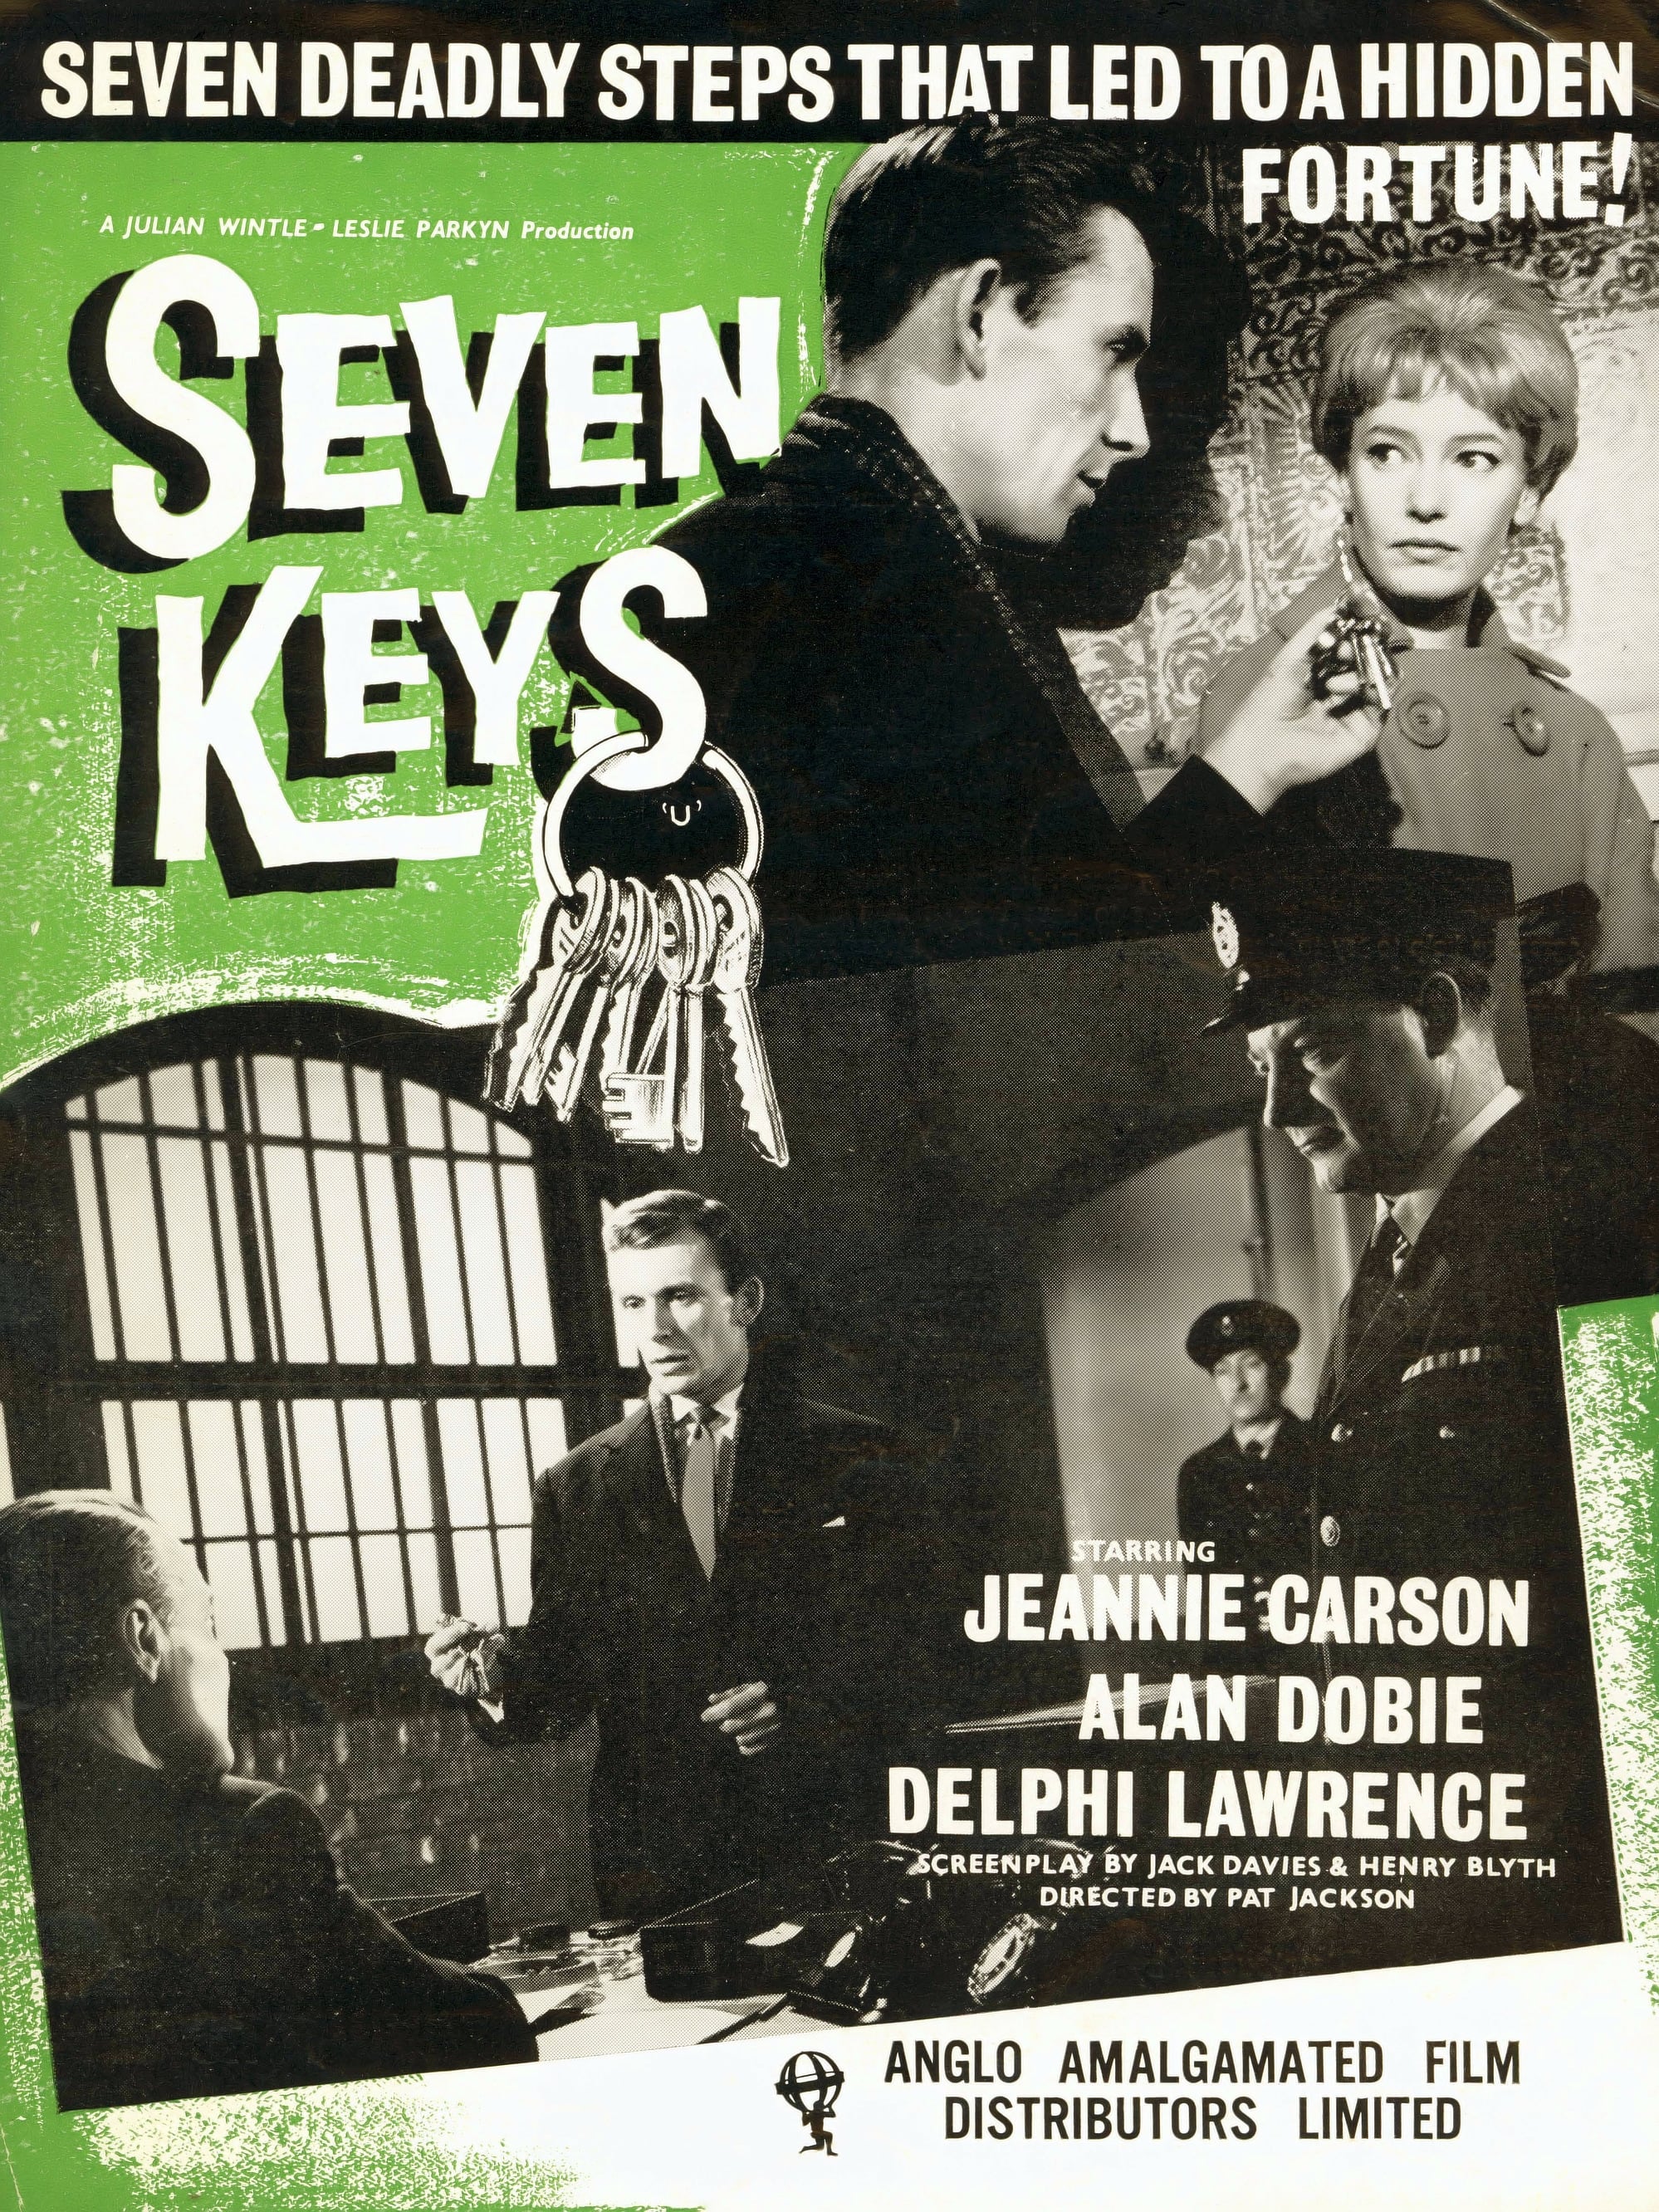 Alan Dobie plays a convict who is bequeathed a set of seven keys by a fello...